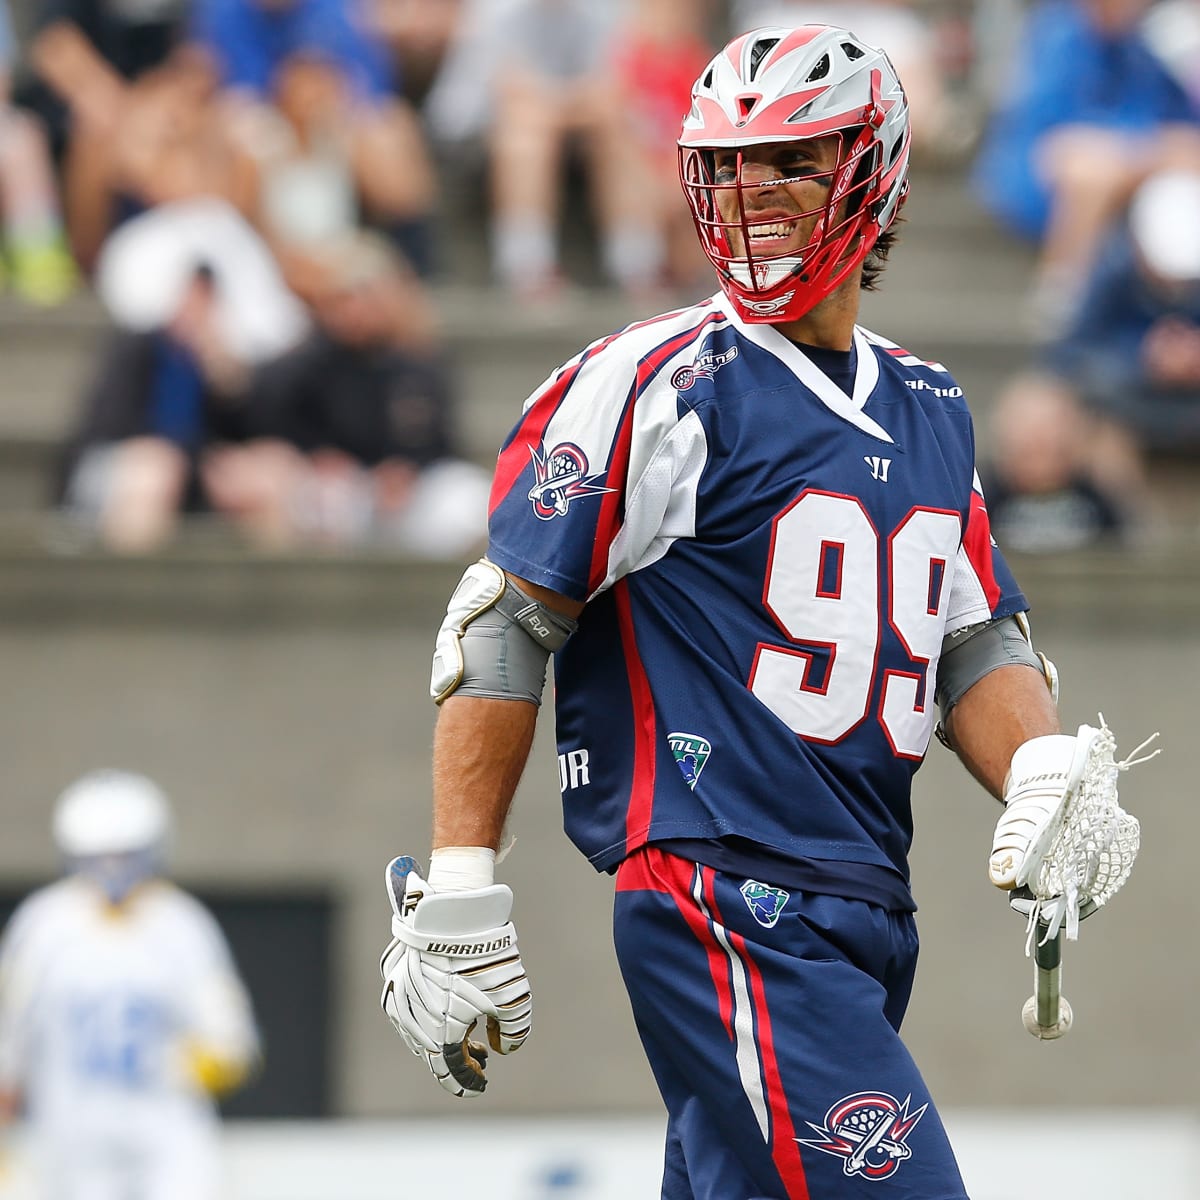 Paul Rabil trade: New York Lizards acquire two-time Major League